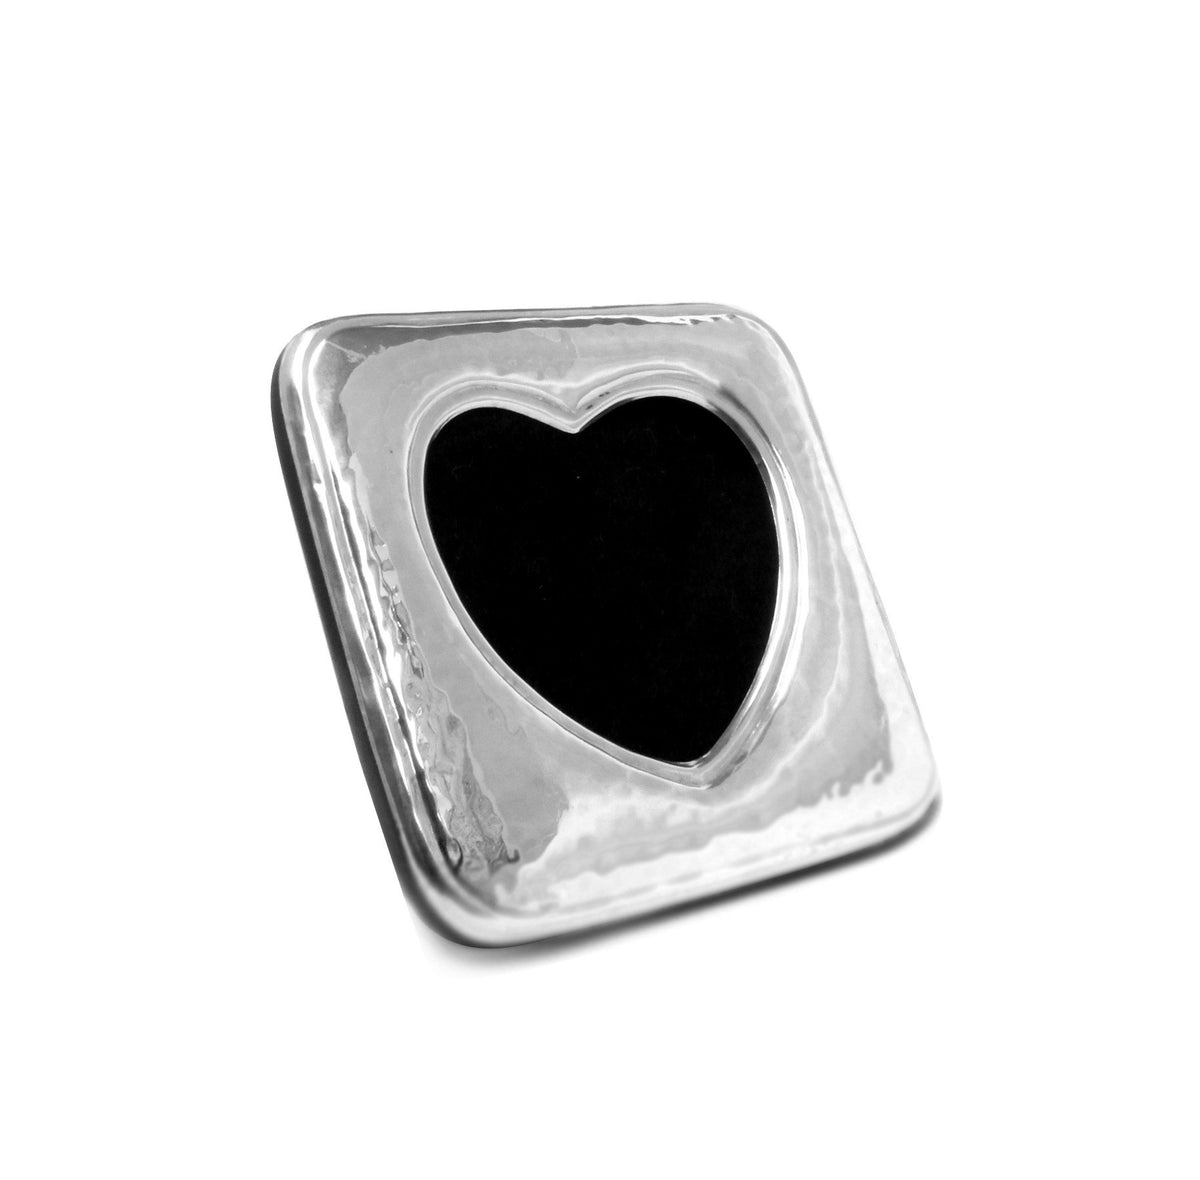 Heart Frame in Sterling Silver - Qinti - The Peruvian Shop